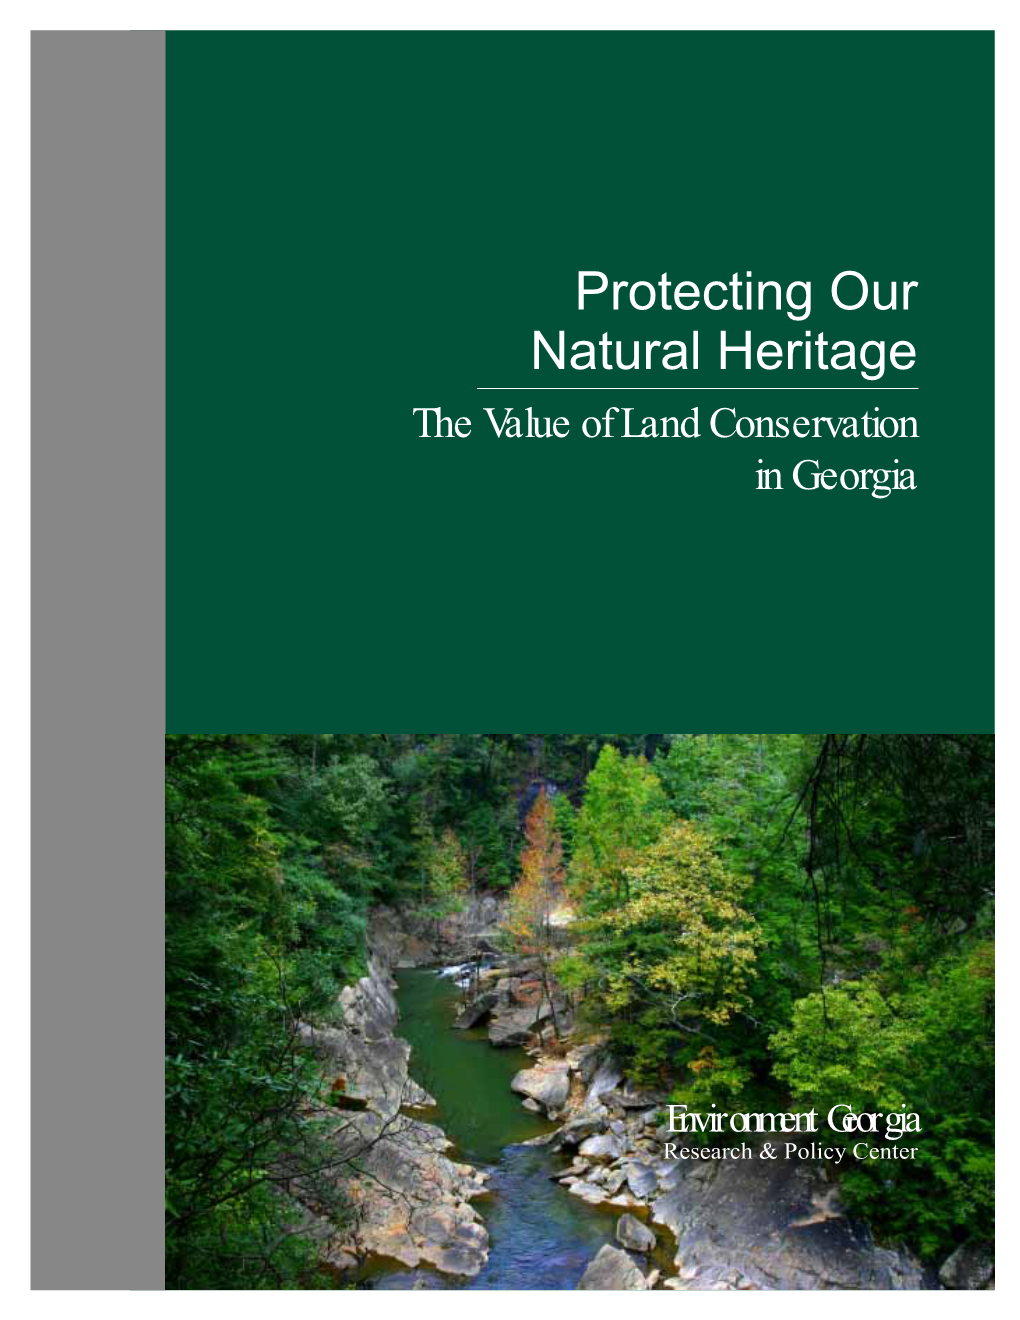 Protecting Our Natural Heritage: the Value of Land Conservation in Georgia